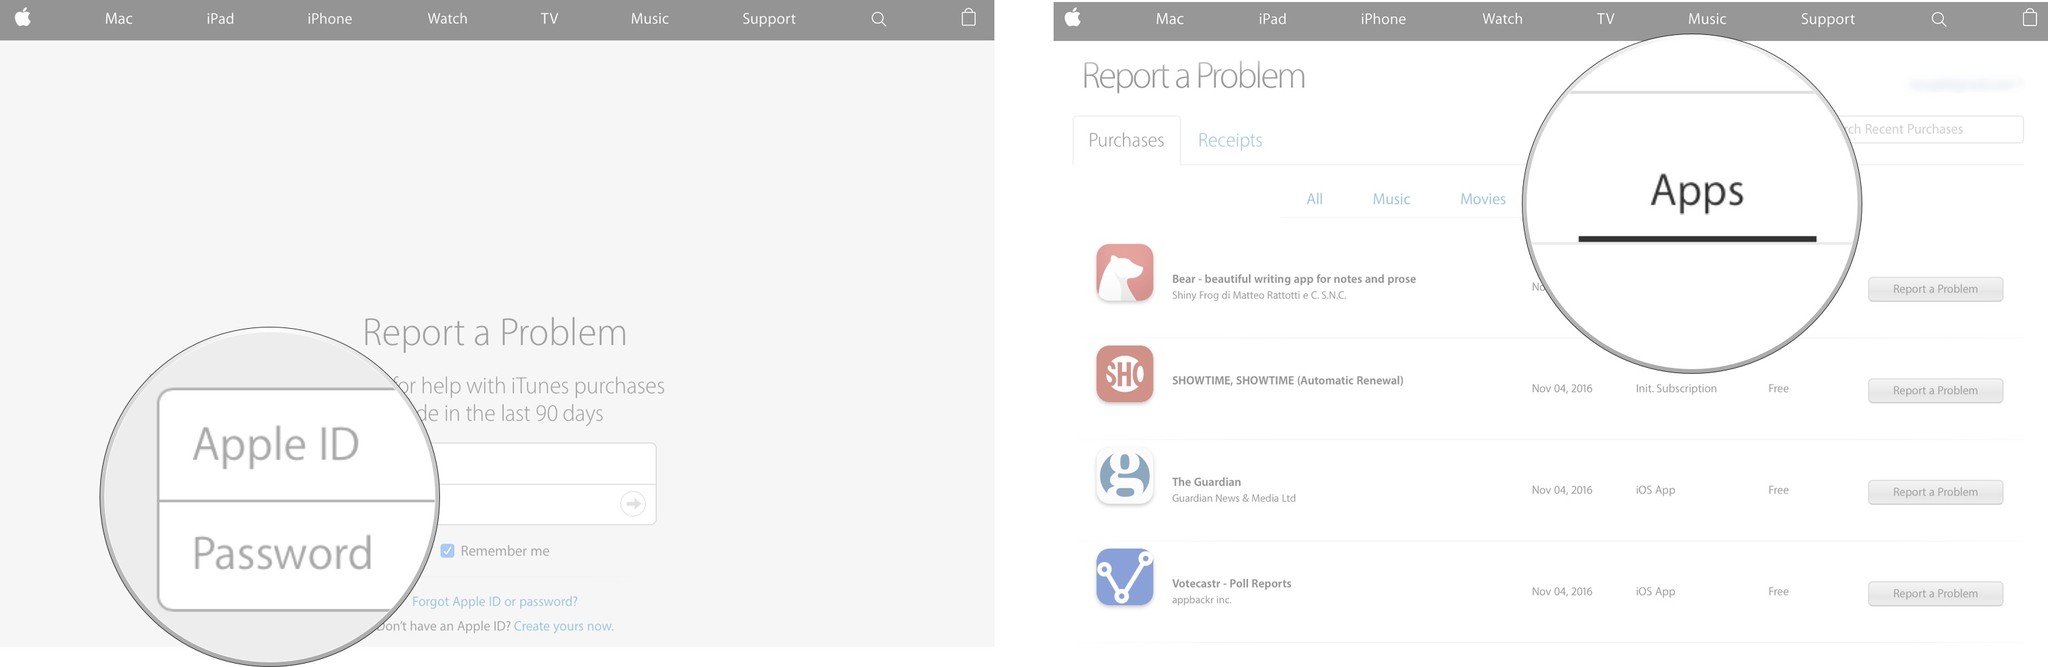 Visit reportaproblem.apple.com, then enter your Apple ID, then select the purchase tab for the item you want to report